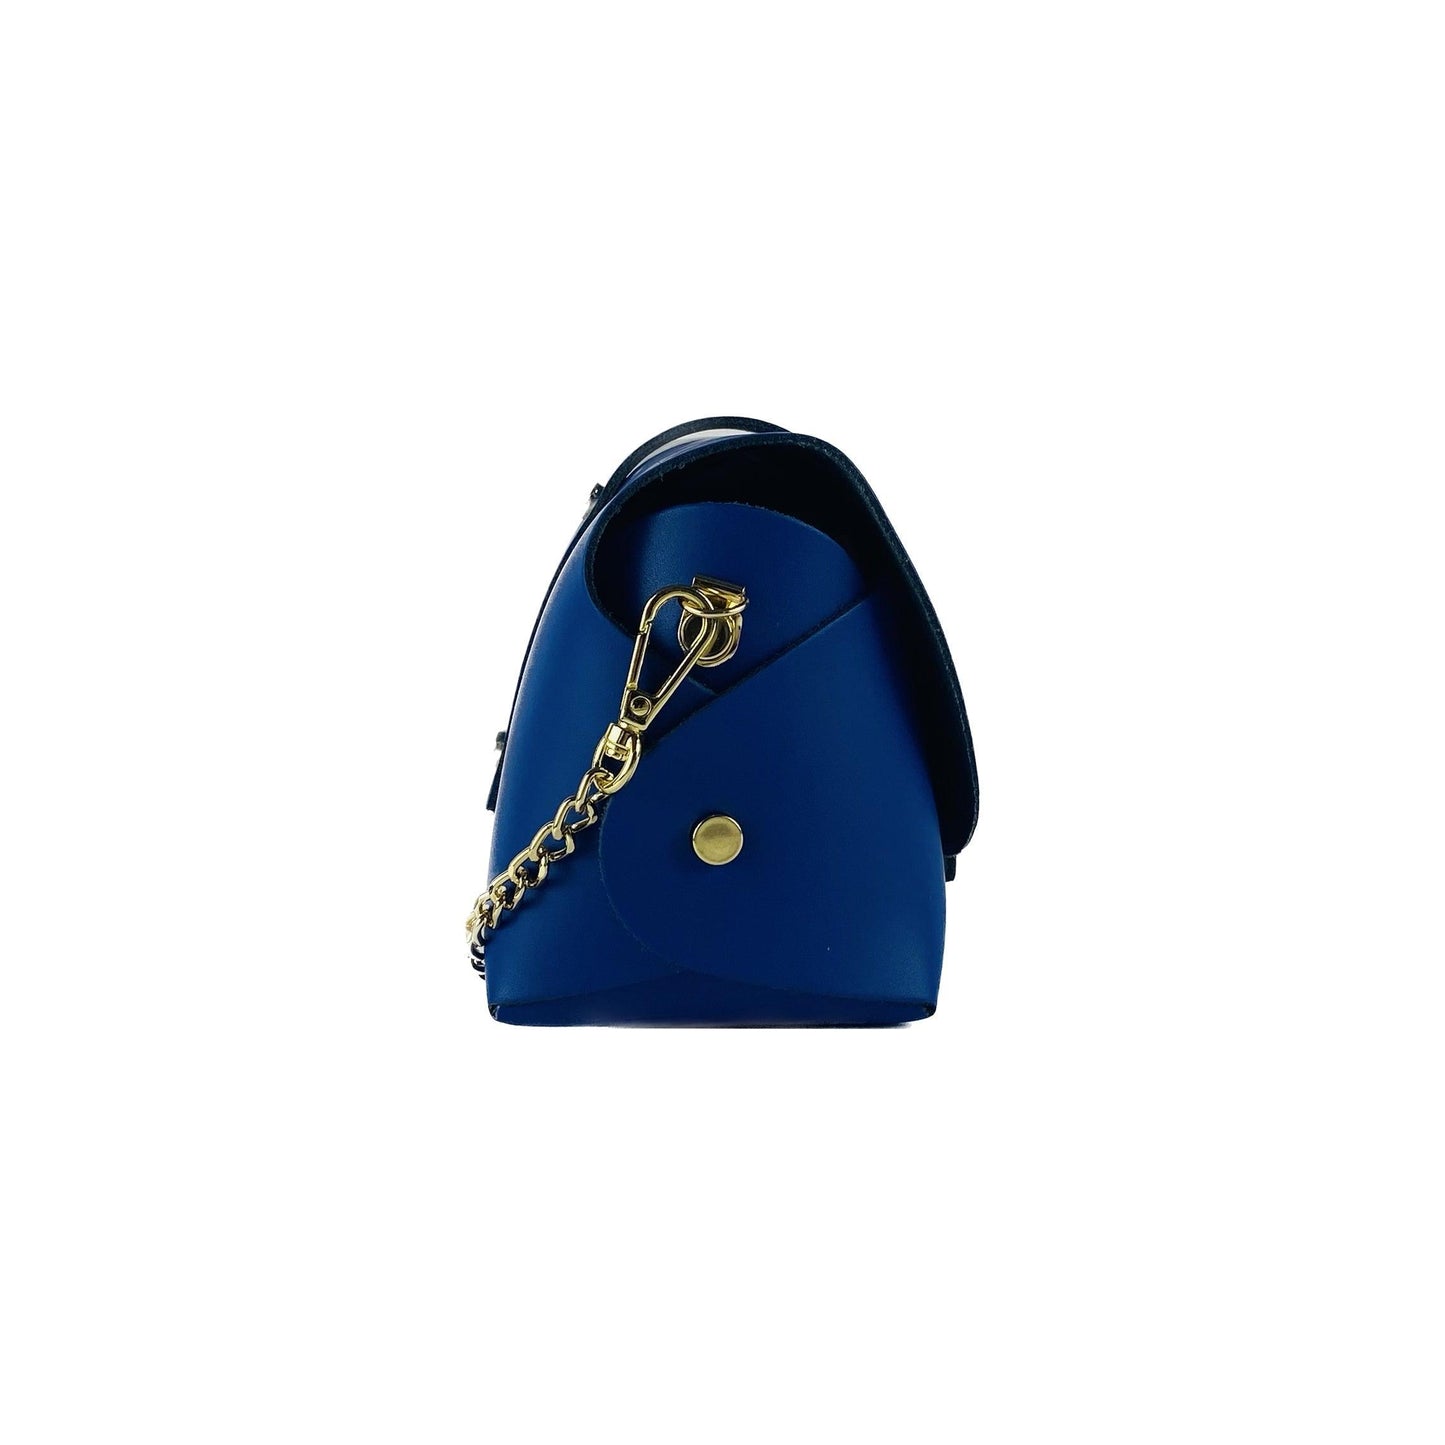 RB1001CH | Small Bag with Chain Shoulder Strap in Genuine Leather | 16.5 x 11 x 8 cm-1